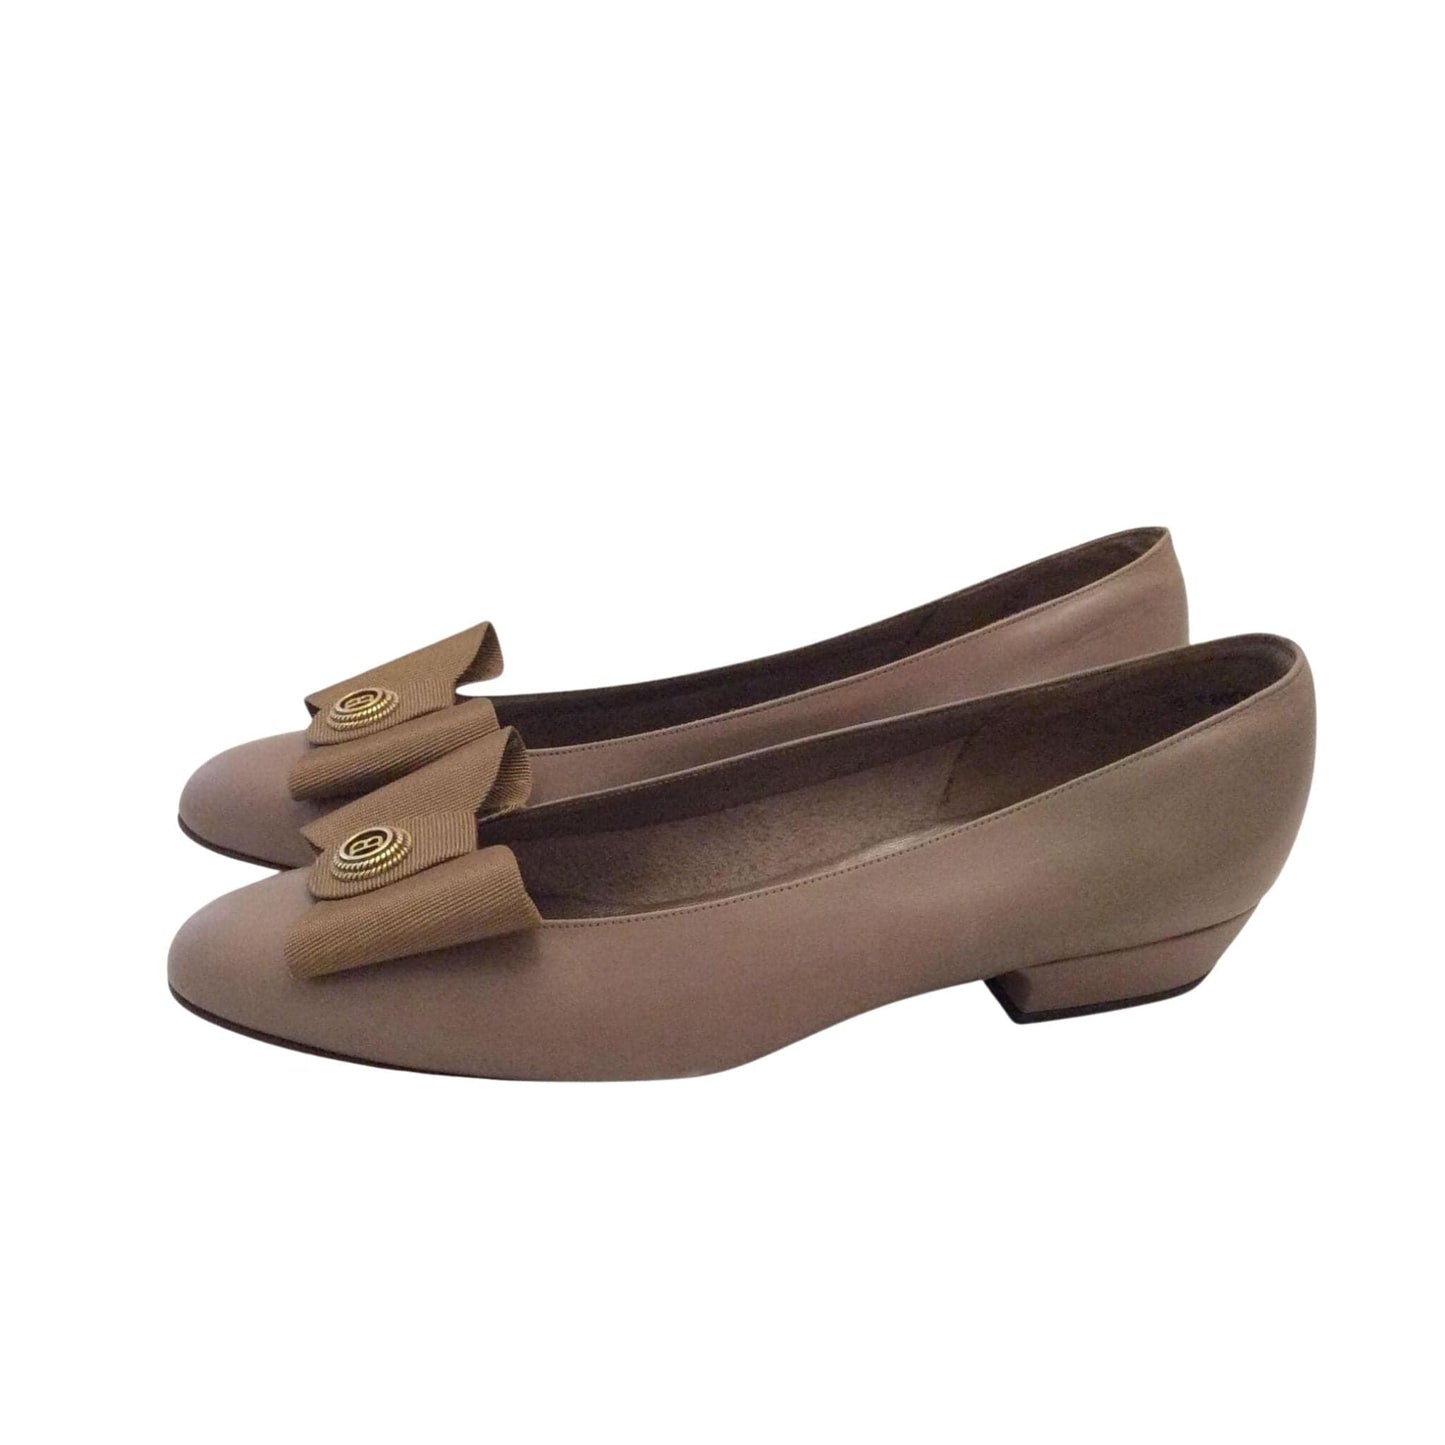 1990s Bally Flat Shoes 6.5 / Taupe / Vintage 1990s